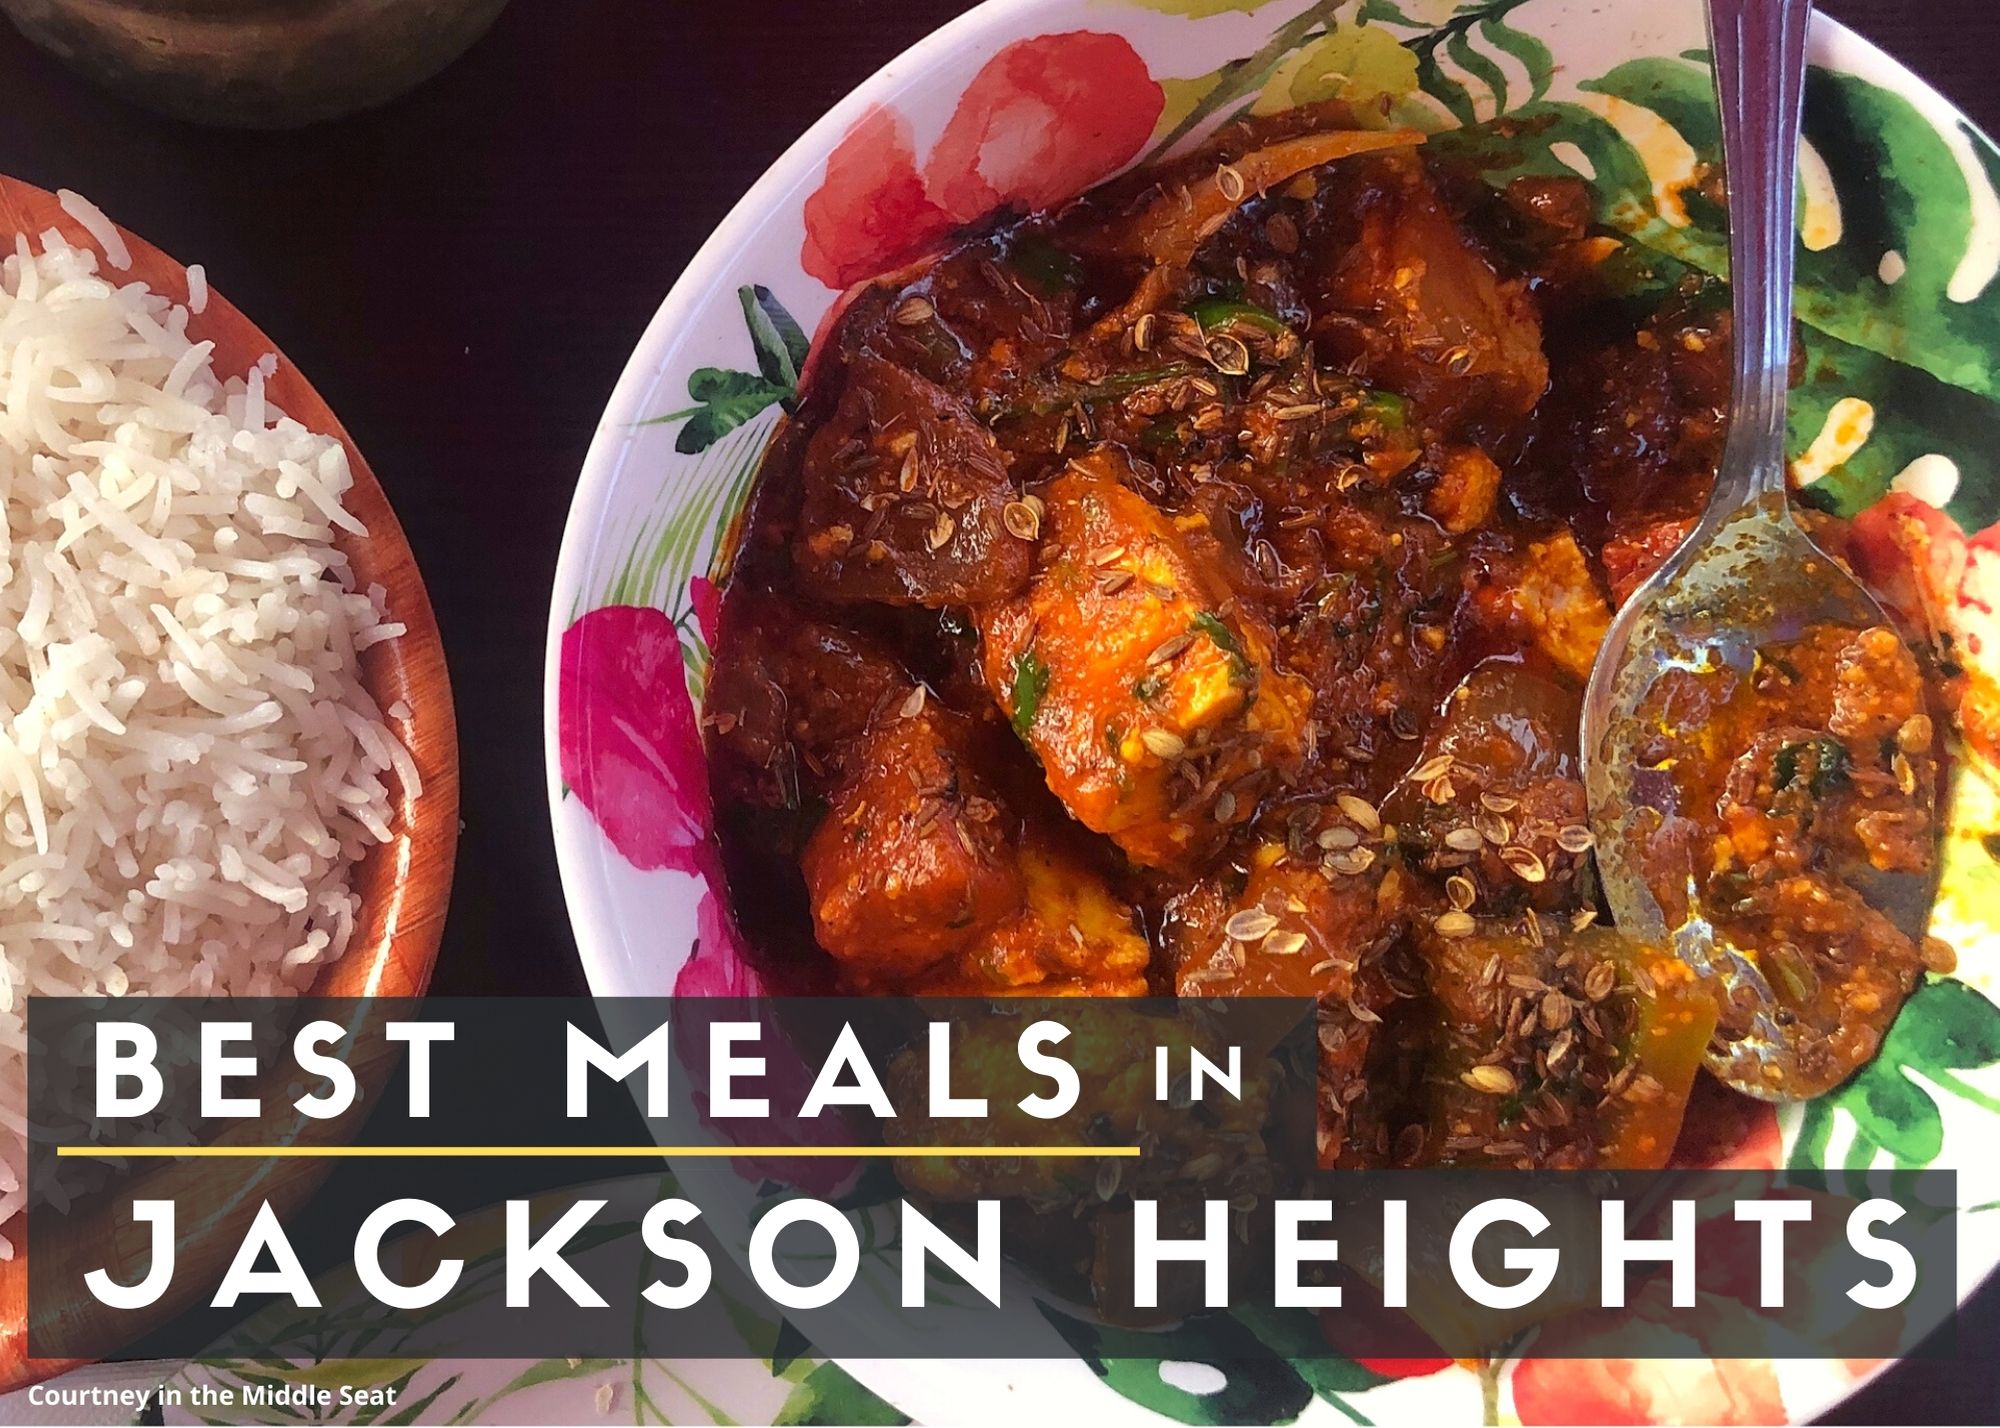 Best Meals in Jackson Heights text with a background image of Paneer